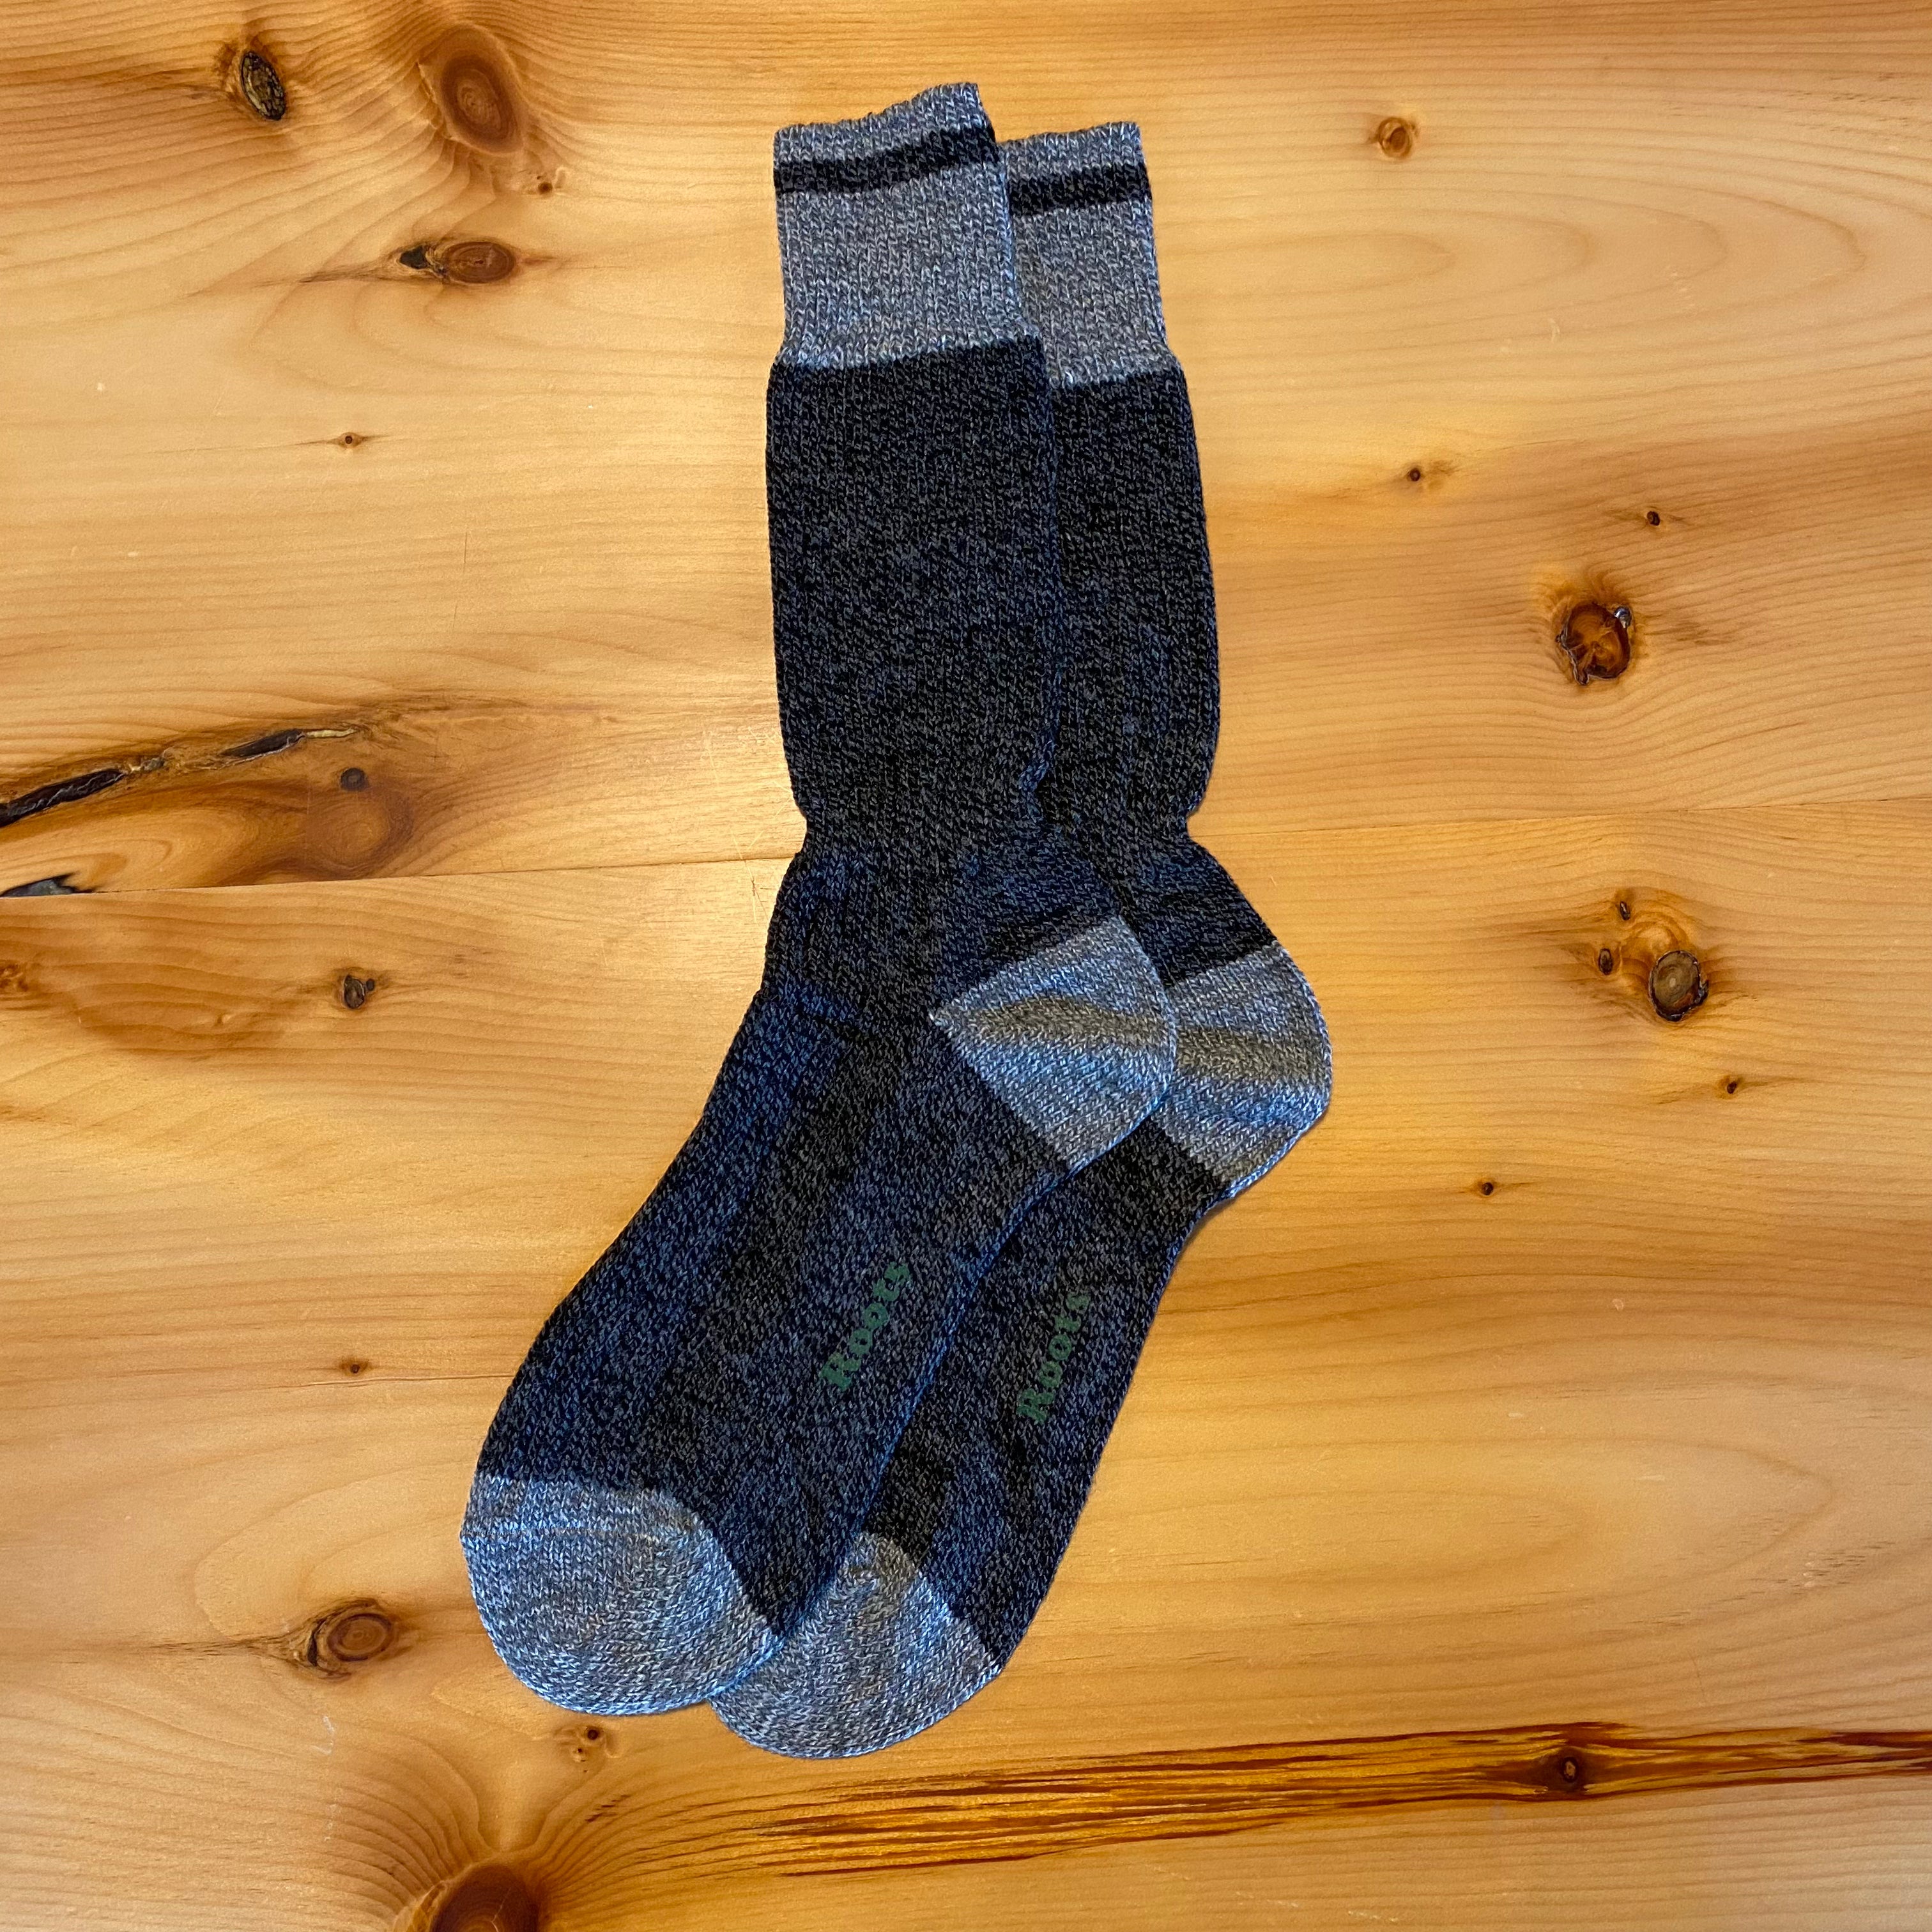 Adult Roots Cabin Sock – 2 Pack - Black Mix with Black Stripe